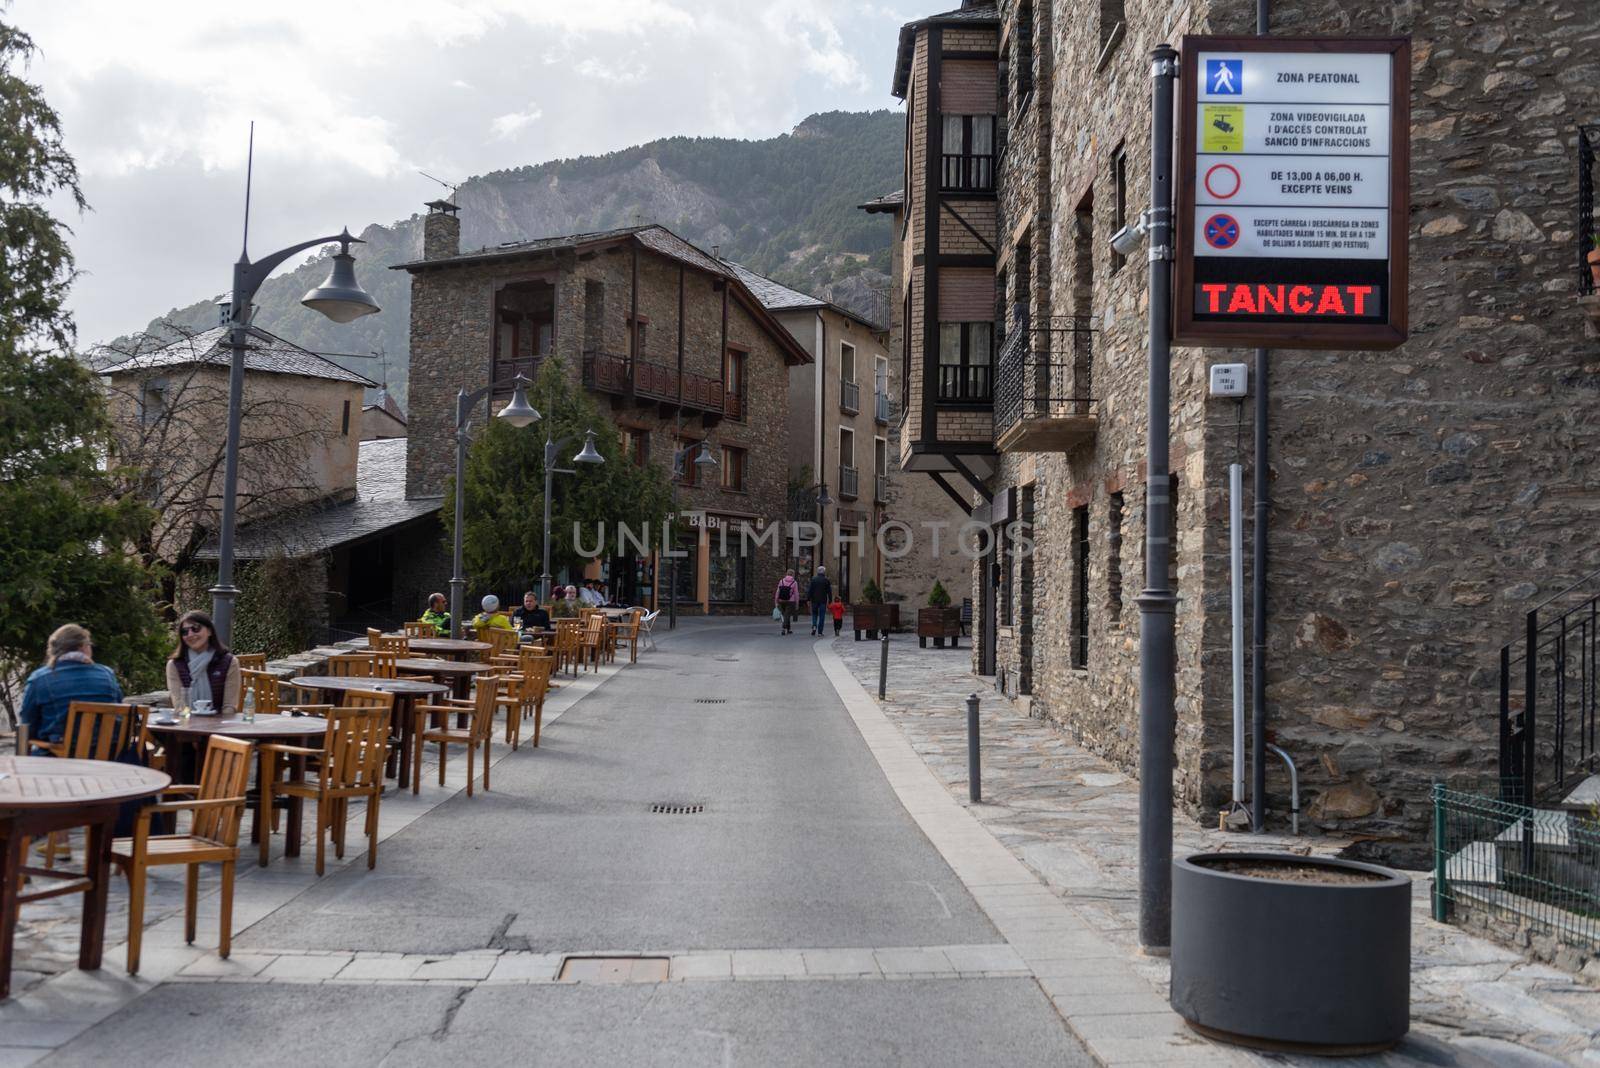 People walking down the street in spring in Ordino, Andorra in the Pyrenees in 2021. by martinscphoto